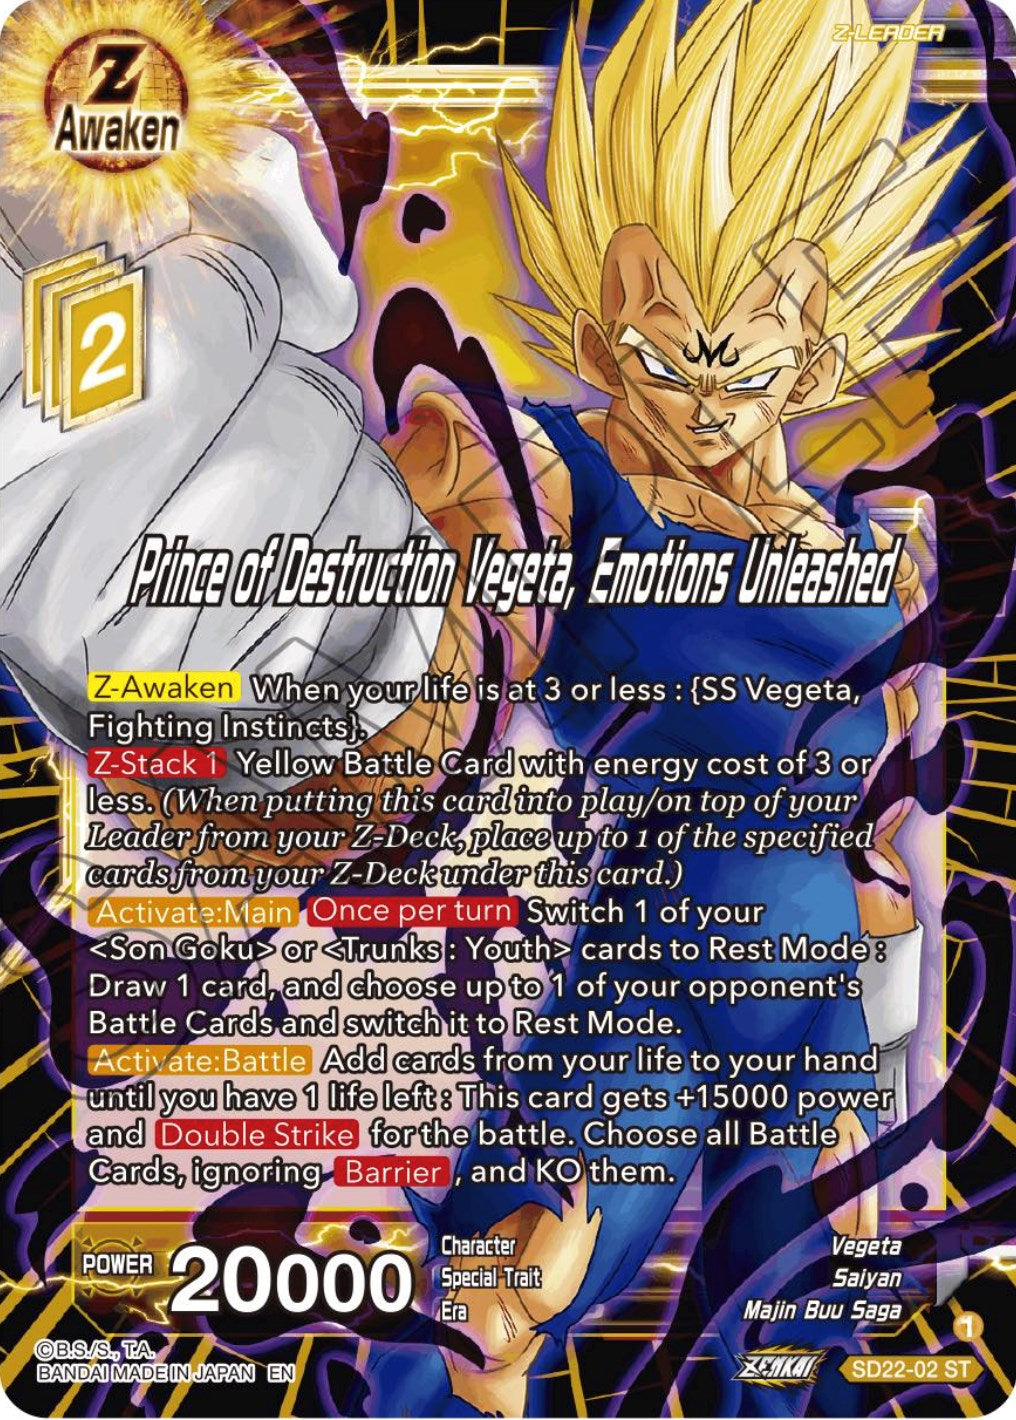 Prince of Destruction Vegeta, Emotions Unleashed (Starter Deck Exclusive) (SD22-02) [Power Absorbed] | North Valley Games